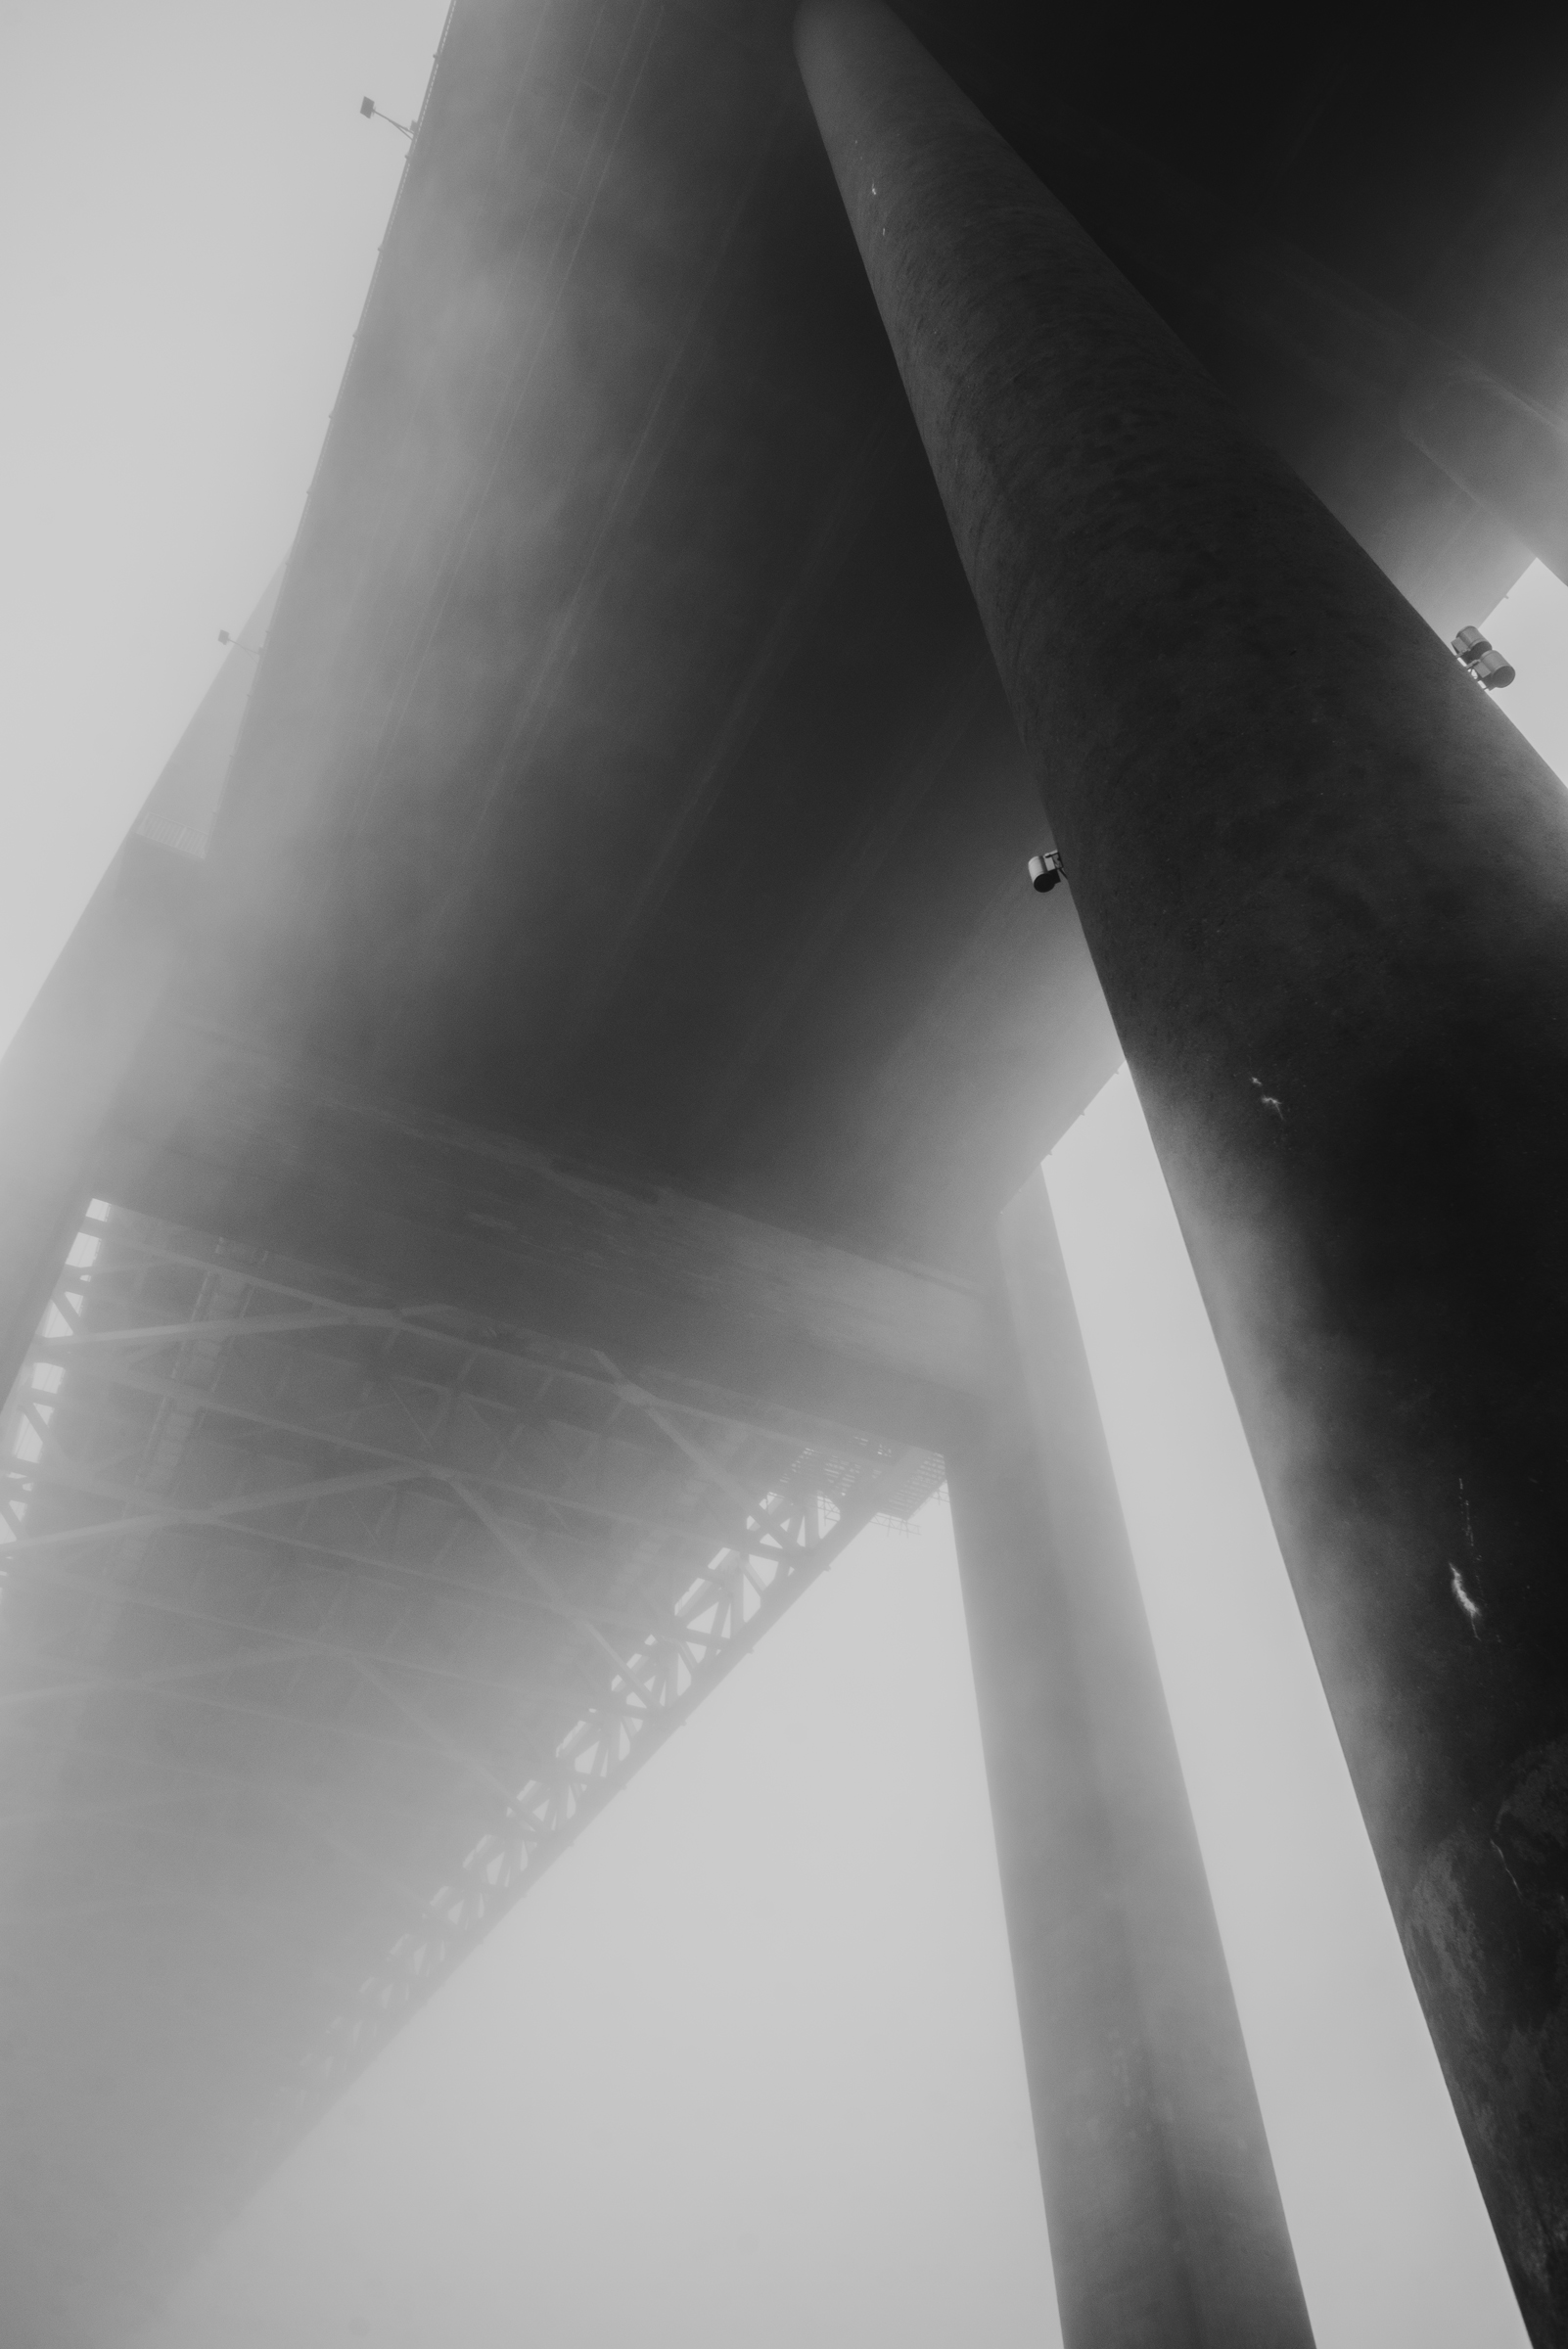 Bridge in thick fog seen from a frog's view